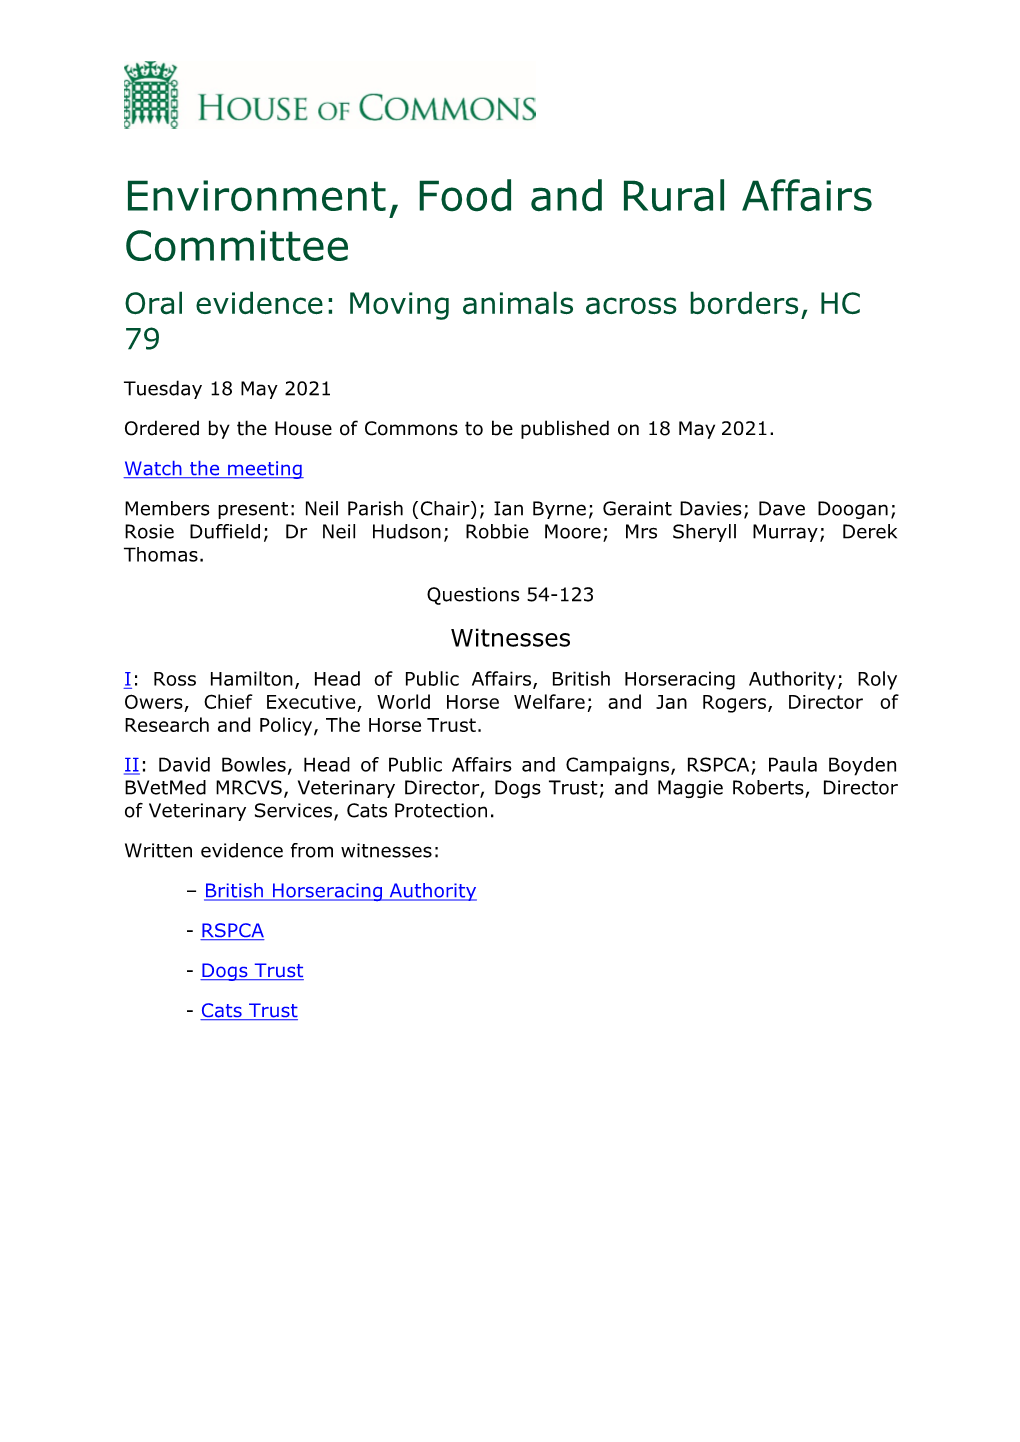 Environment, Food and Rural Affairs Committee Oral Evidence: Moving Animals Across Borders, HC 79